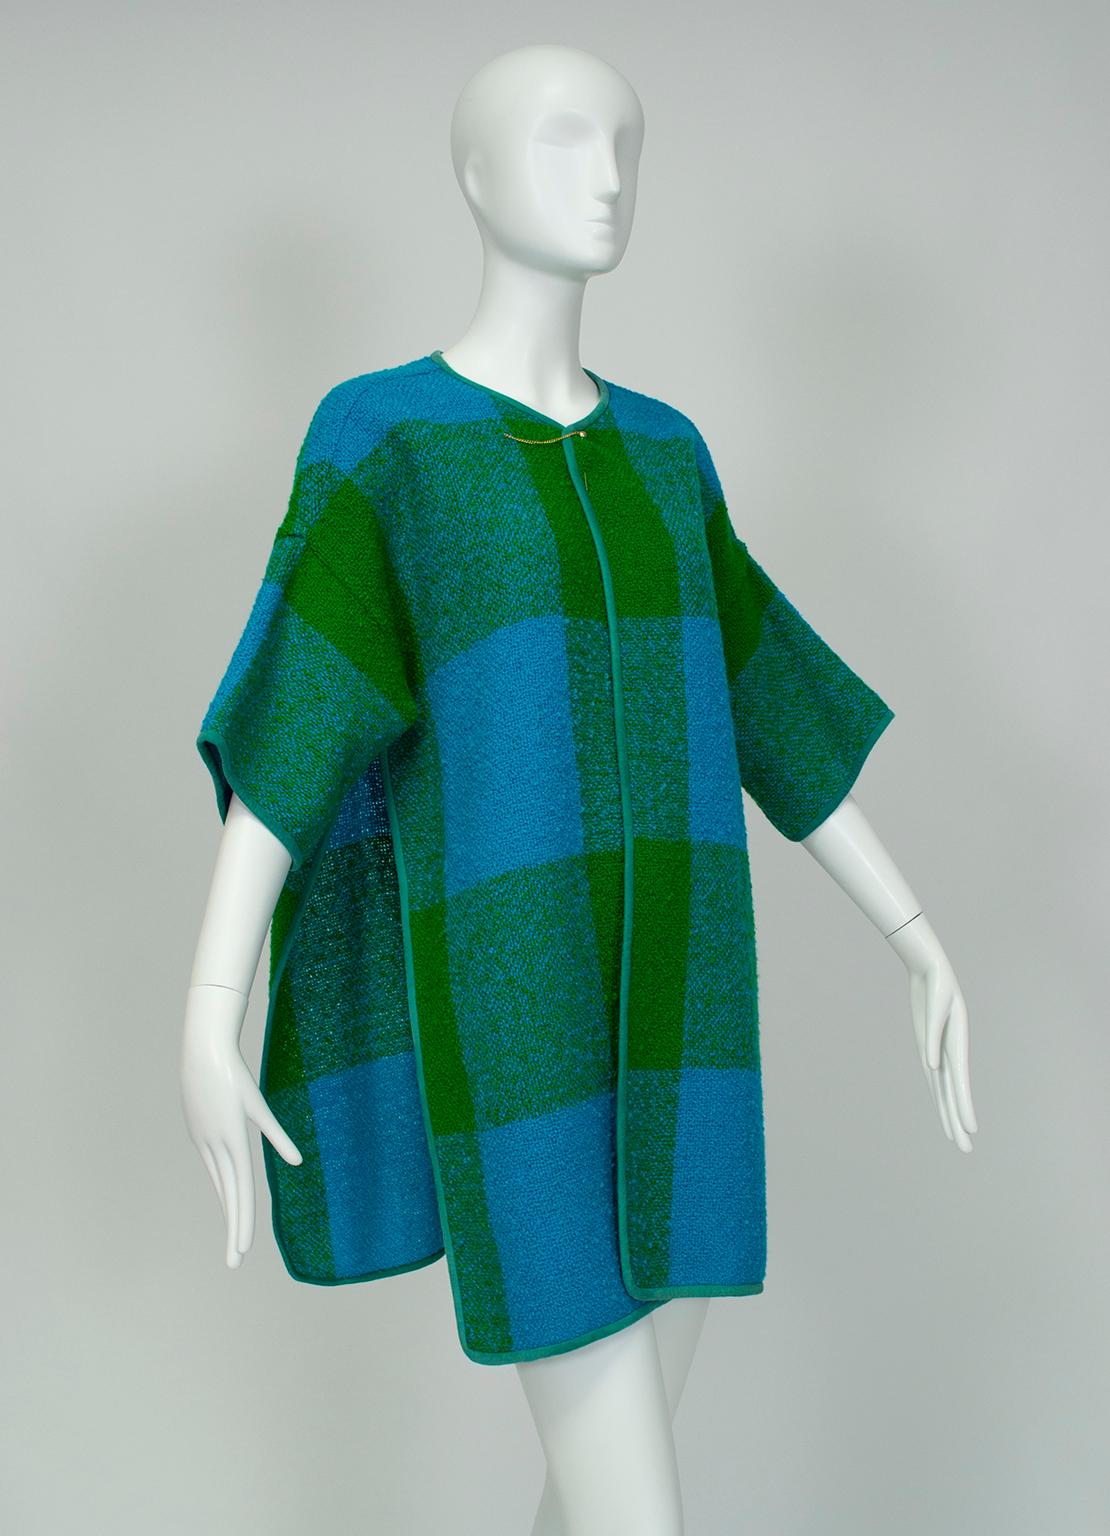 Part of the permanent collection at the Metropolitan Museum of Art, this blanket coat is representative of the innovative, practical yet chic sportswear that earned Cashin her fame.  Little more than a simple T shape with open sides and her